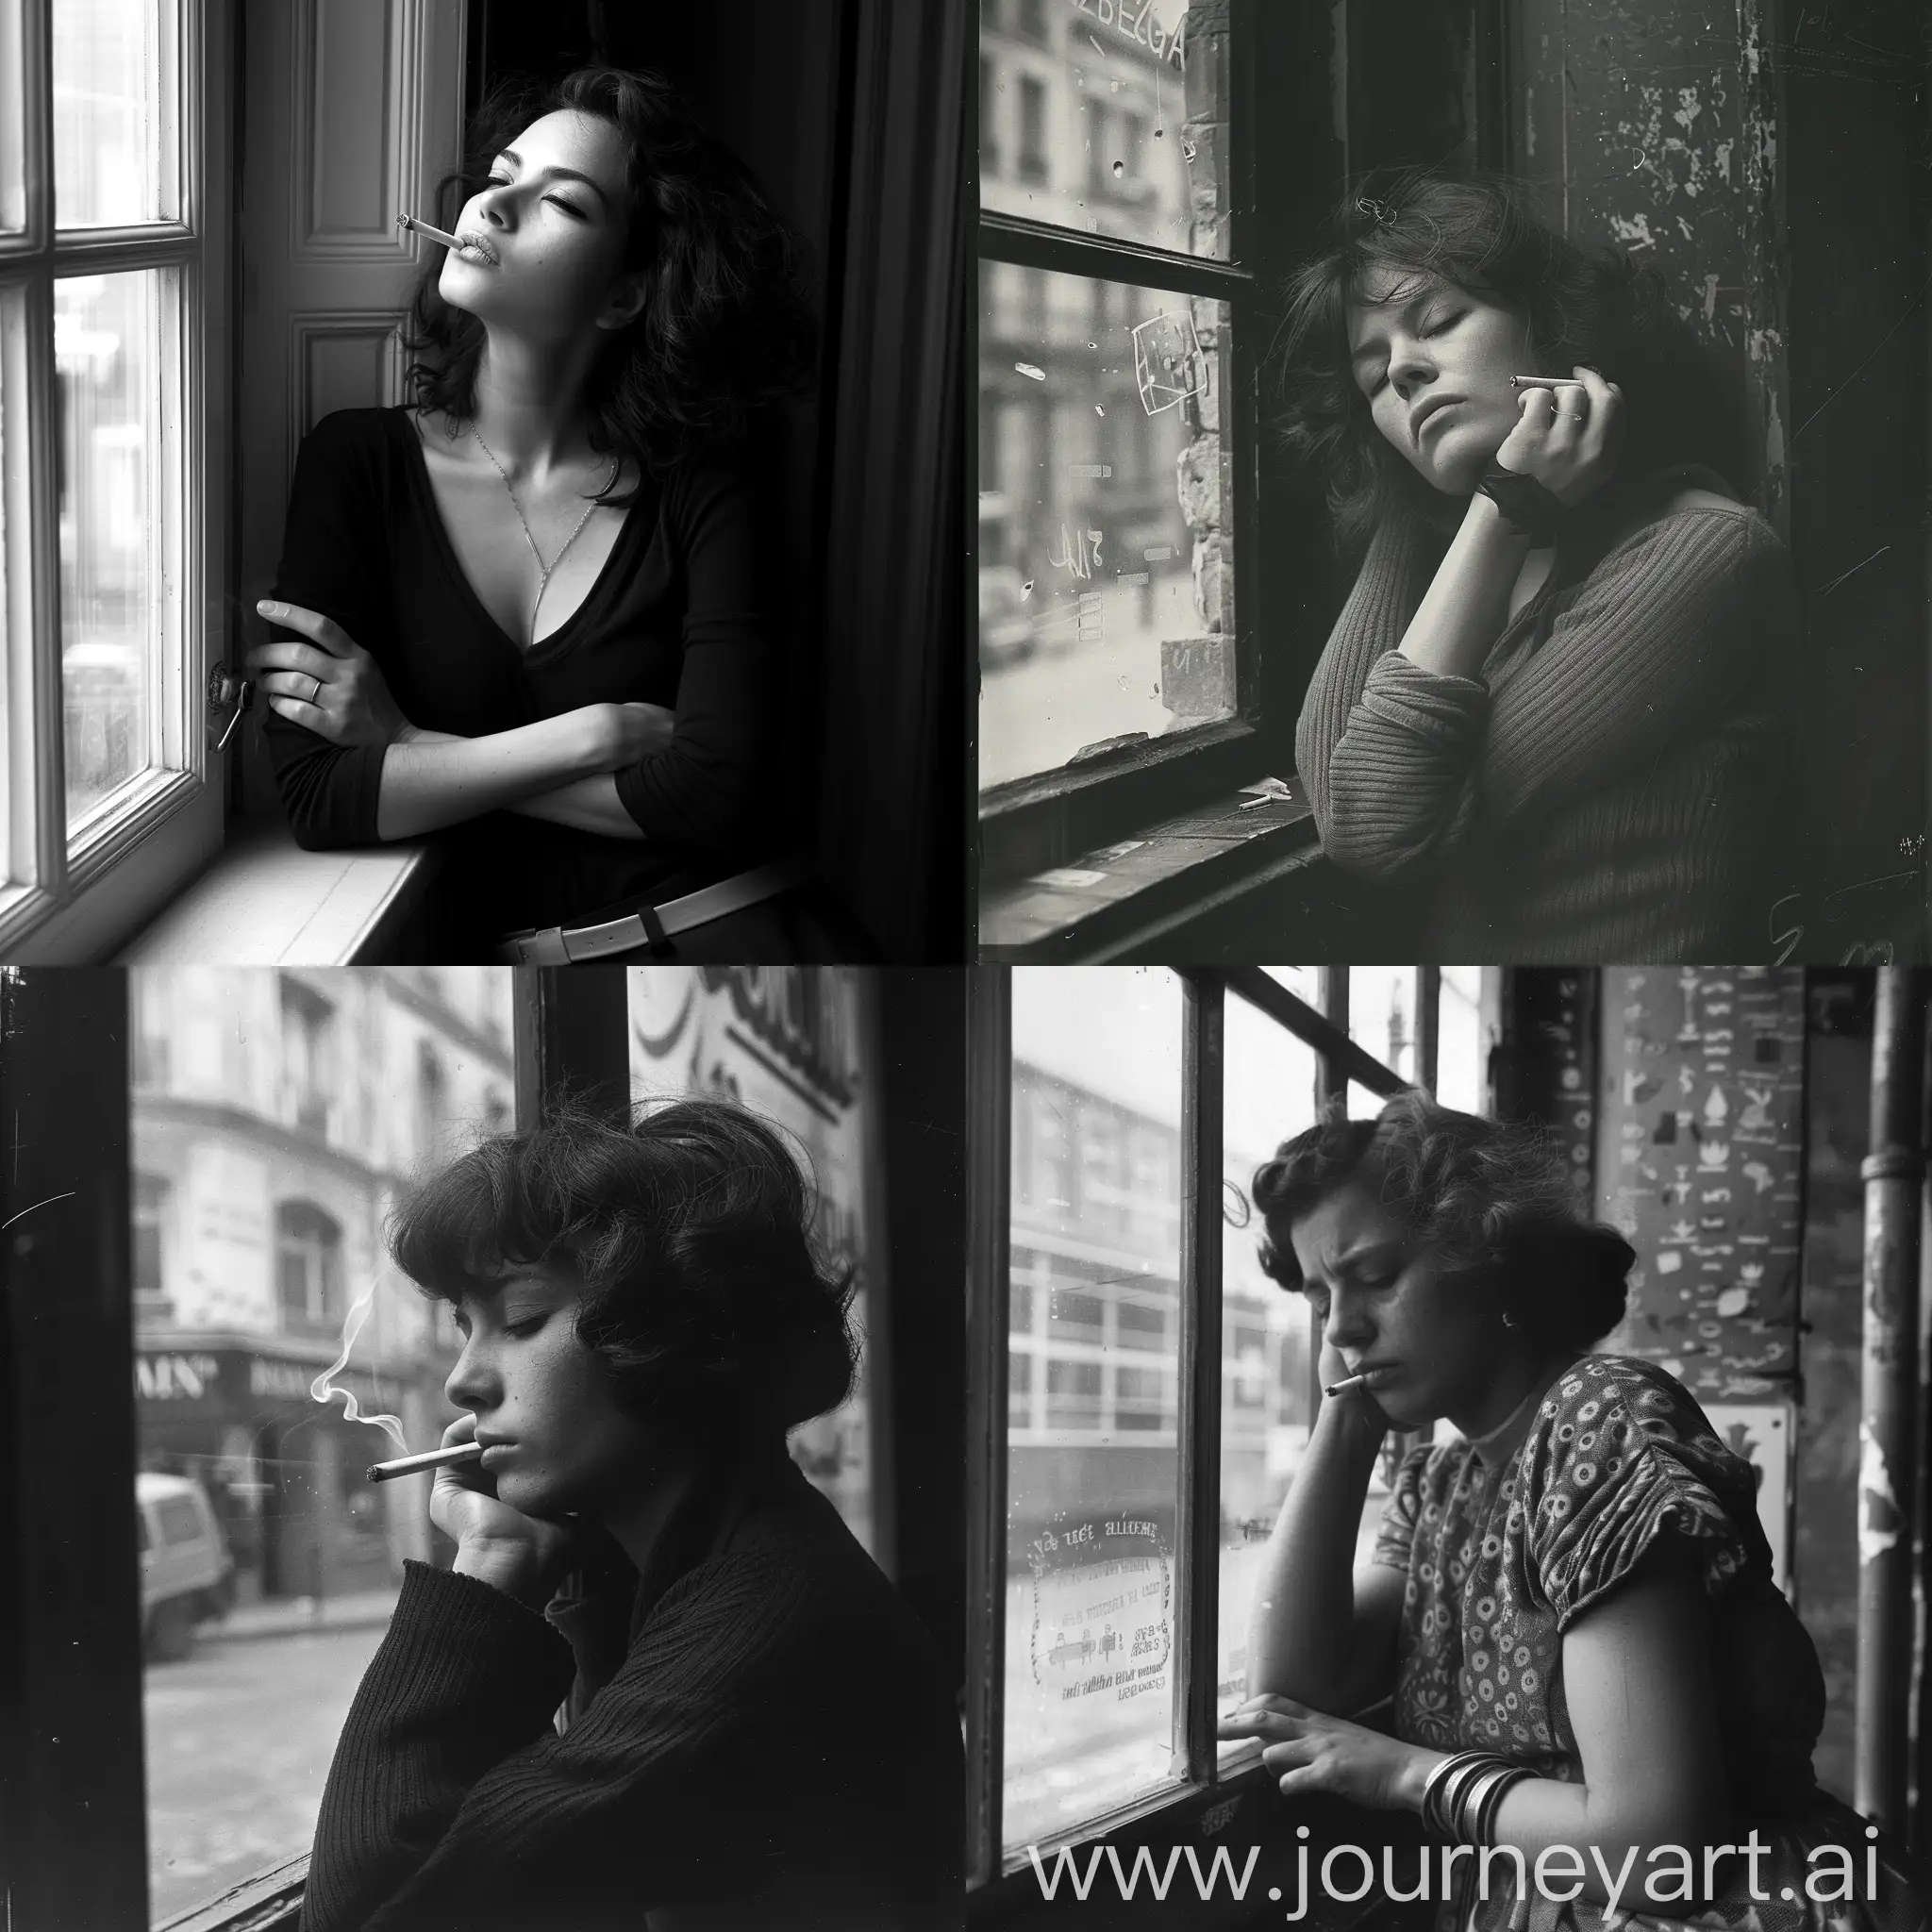 A woman with a cigarette leaned against the window